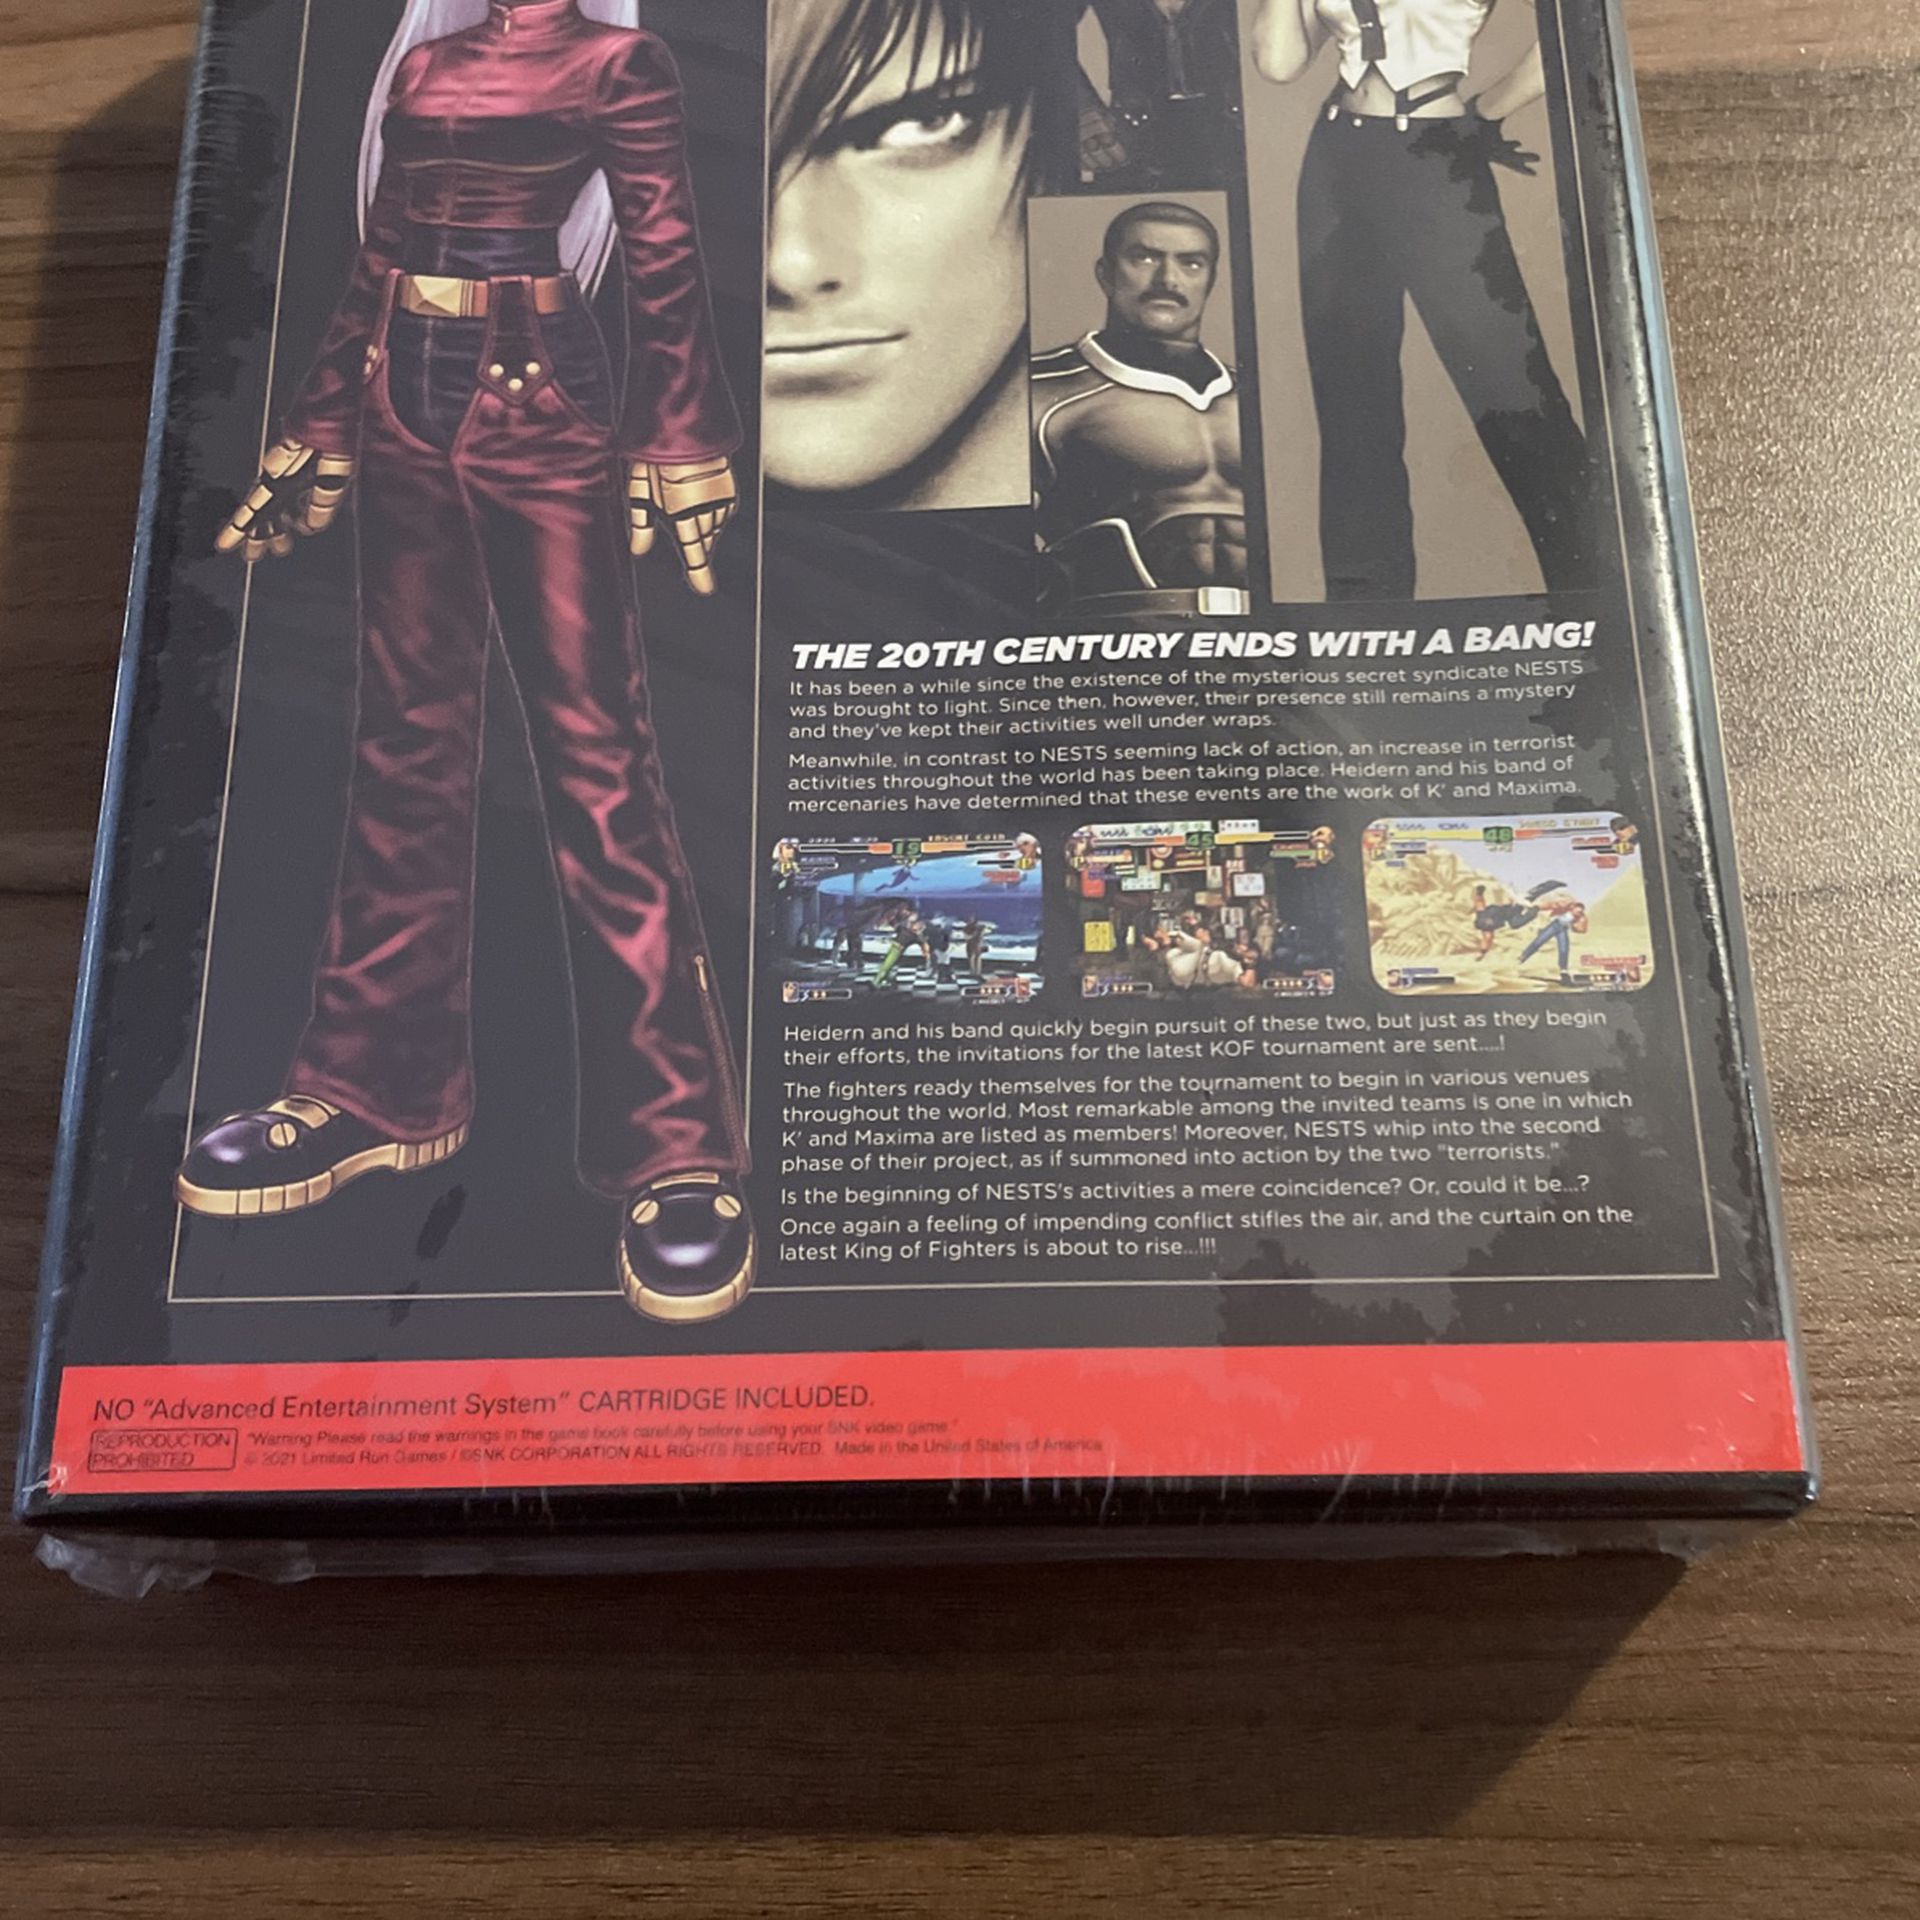 Vita King Of Fighters 97 Global Match PlayStation for Sale in Roselle Park,  NJ - OfferUp